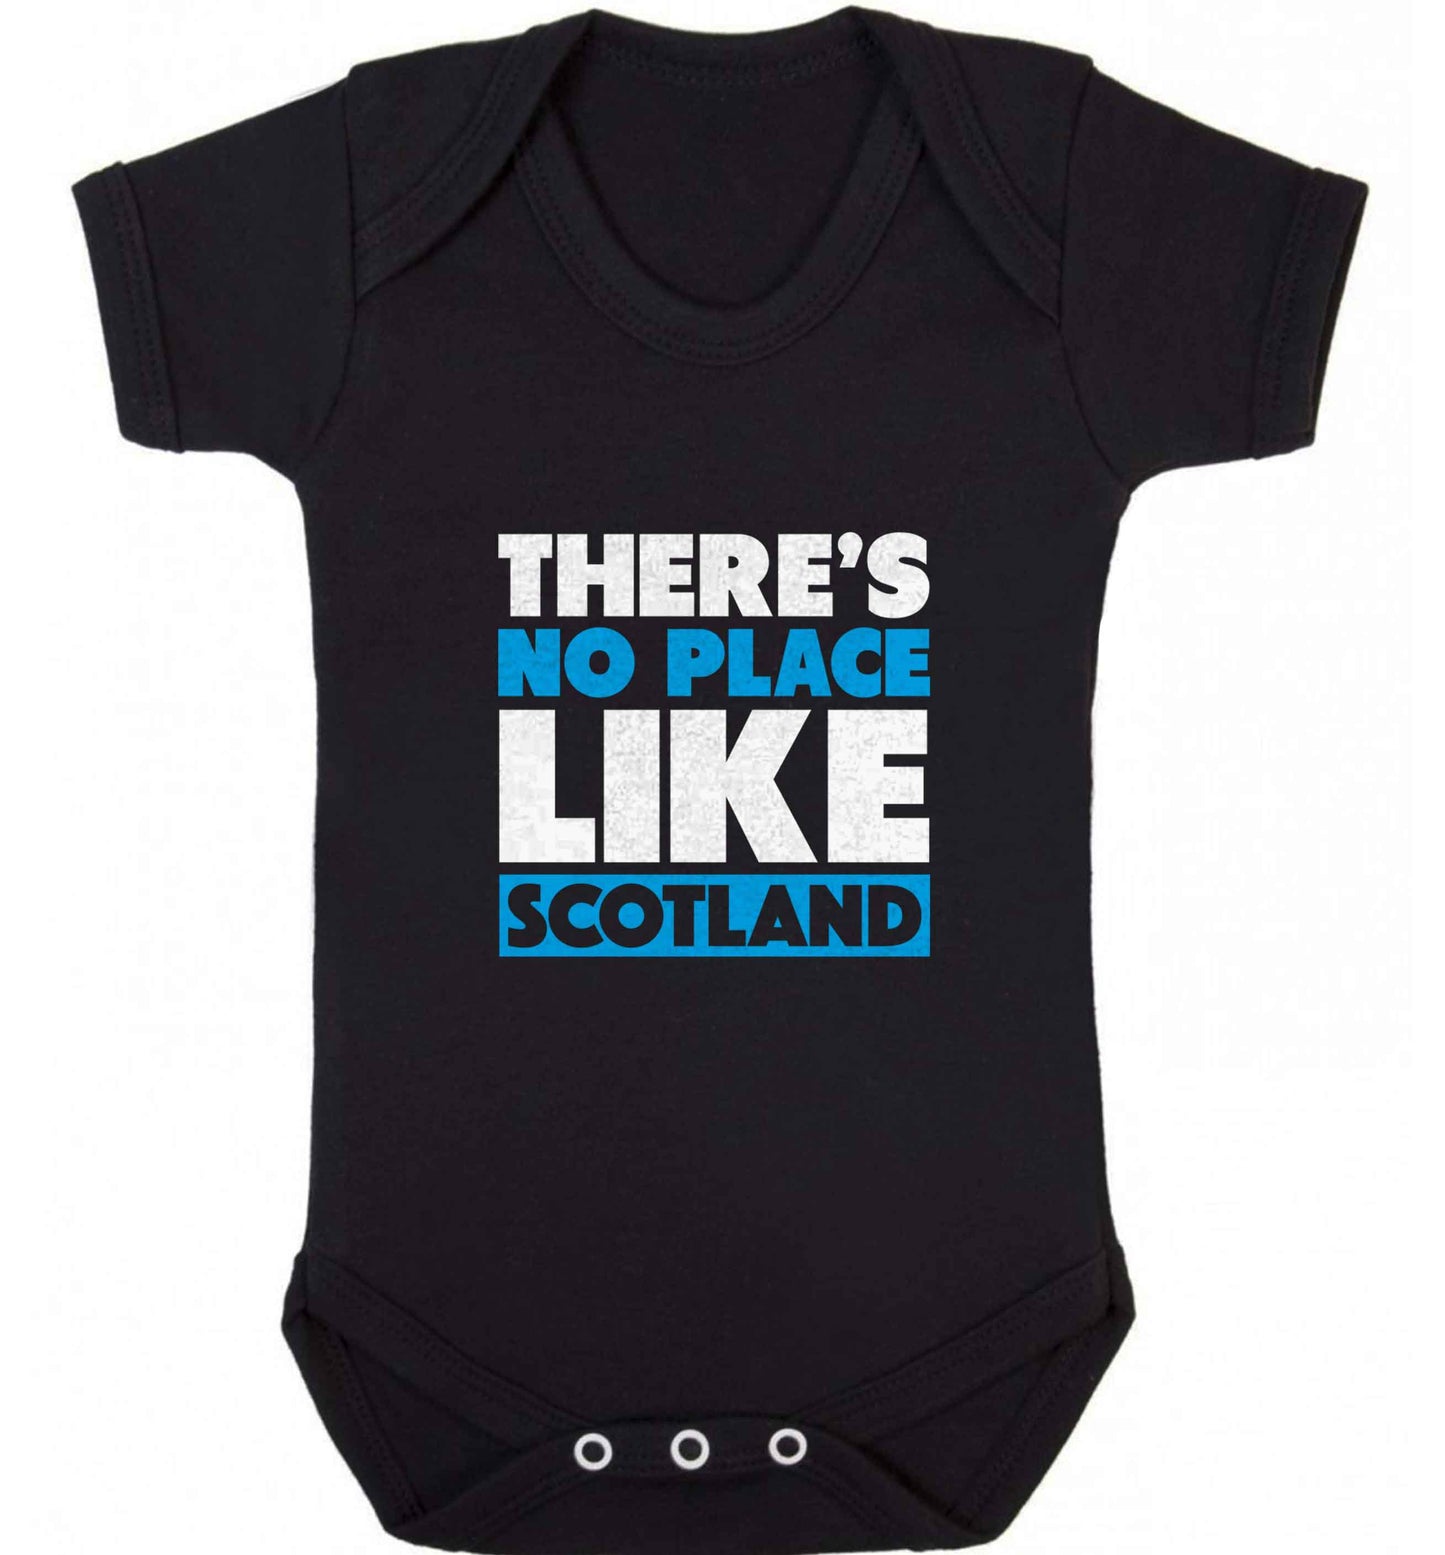 There's no place like Scotland baby vest black 18-24 months